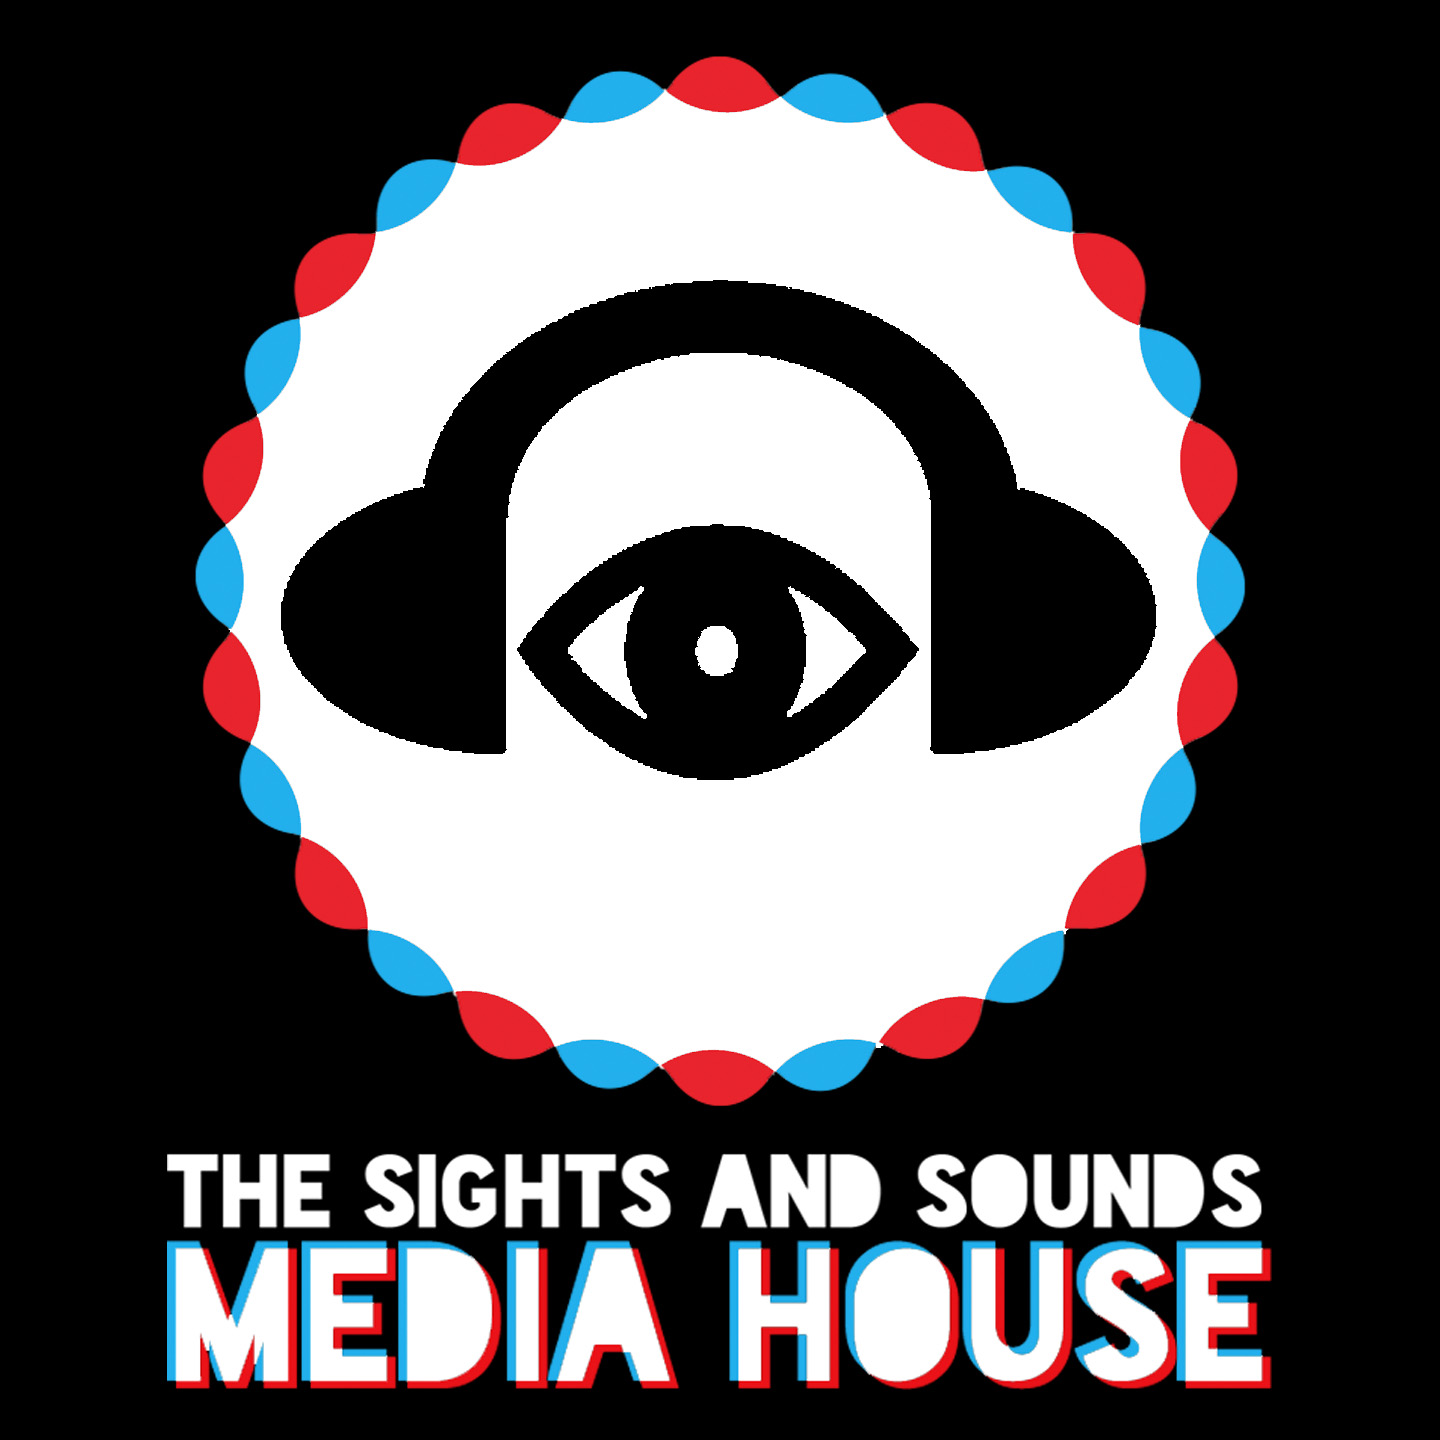 The Sights and Sounds Media House